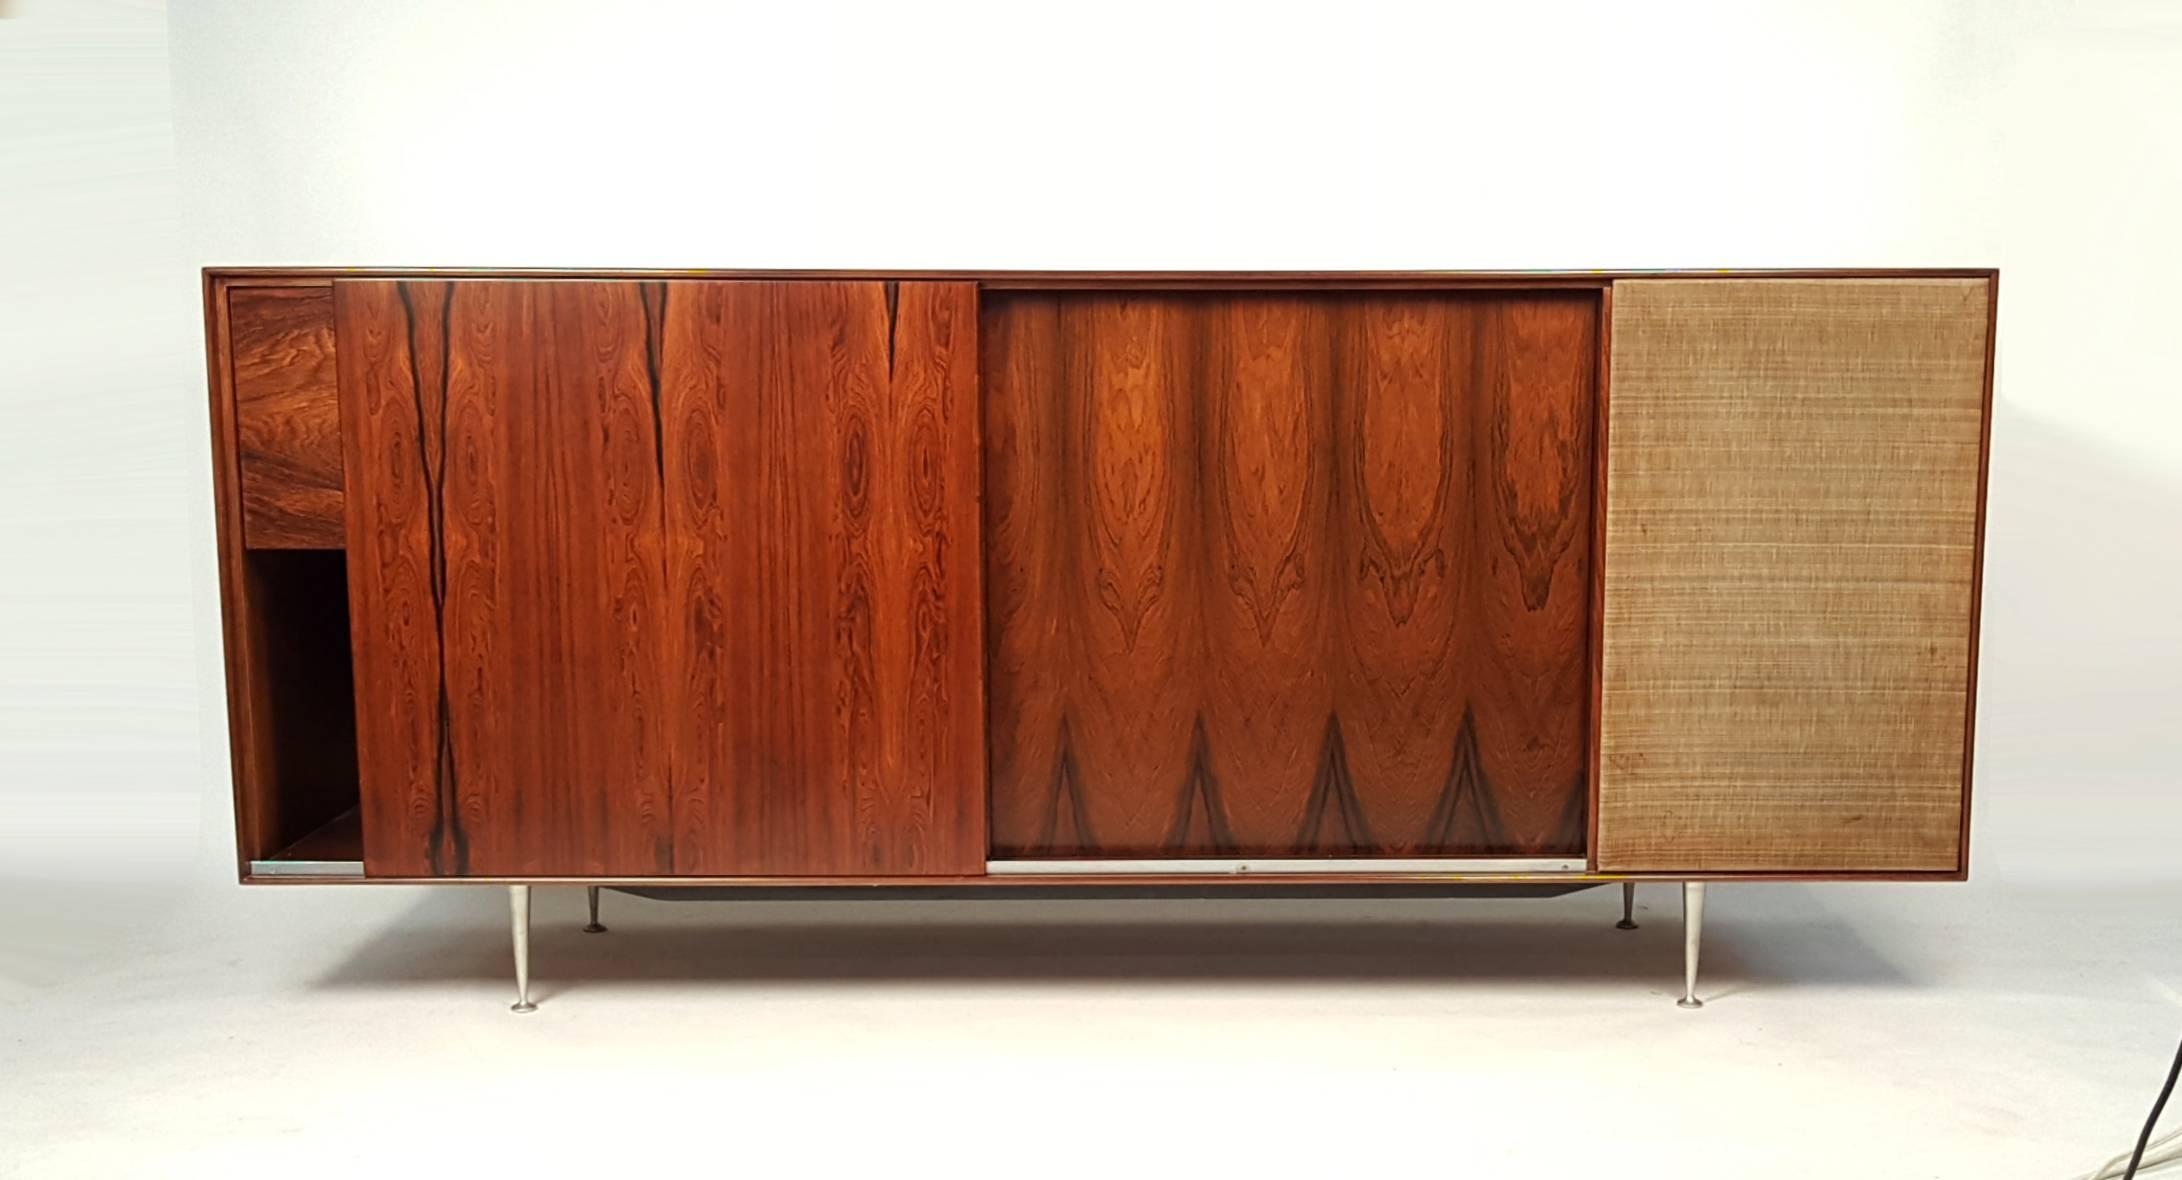 Rare Brazilian rosewood cabinet by George Nelson for Herman Miller with drop front panel that opens to reveal the original Garrard RC-80M Turntable and Harmon Kardon Festival Mullard El 37 Tube powered integrated receiver. Both Electronic pieces are